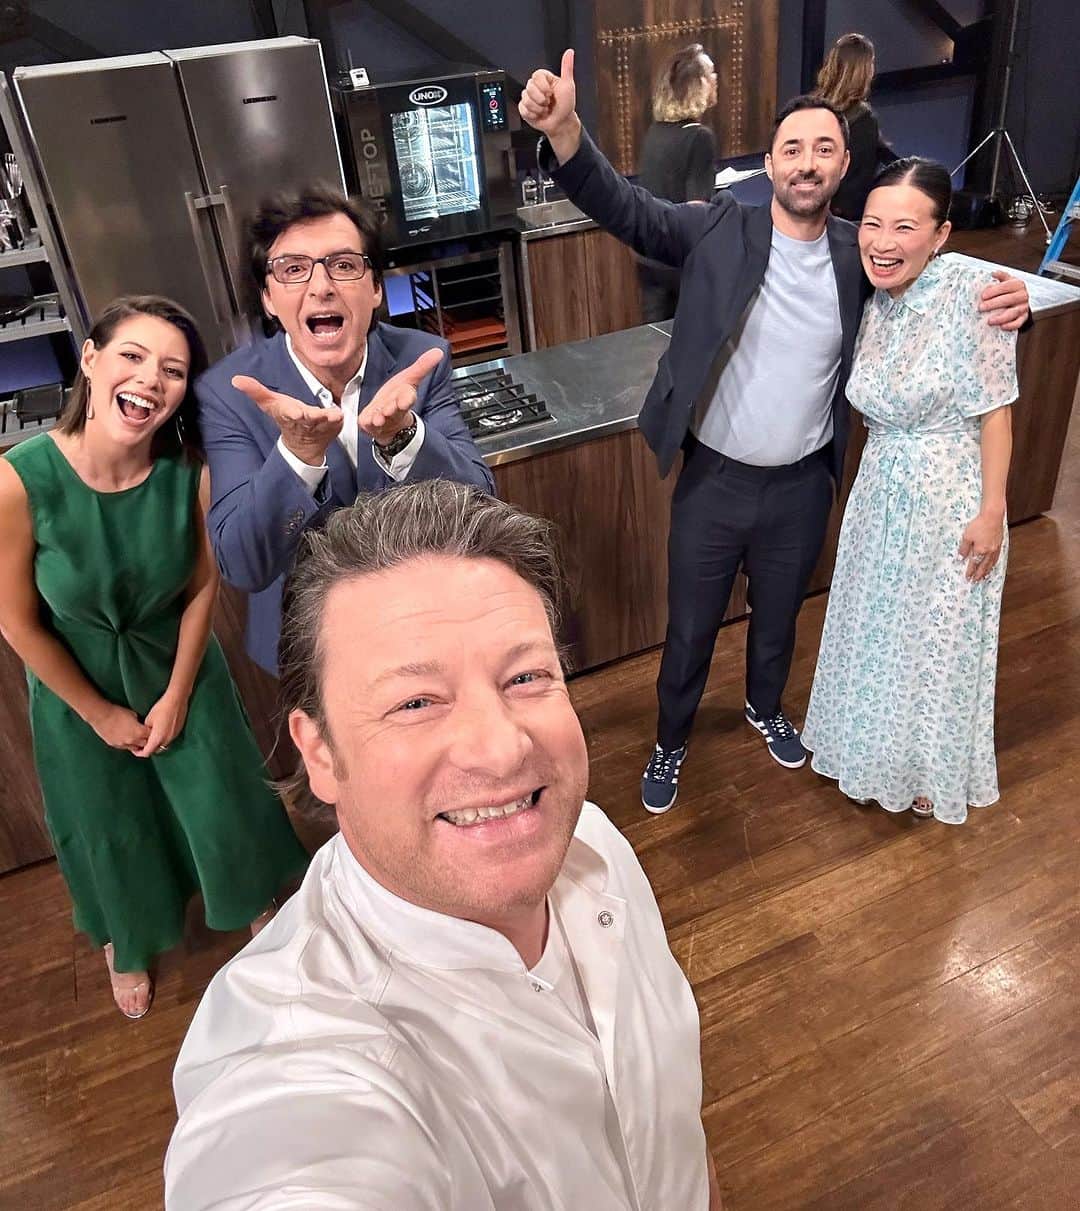 ジェイミー・オリヴァーさんのインスタグラム写真 - (ジェイミー・オリヴァーInstagram)「This is a long one Australia…With a very heavy heart I leave the @masterchefau family in the beautiful city of Melbourne after two amazing and busy weeks of filming. This year was always going to be very very hard with the incredibly sad loss of Jock something that shocked the nation, the hole he has left is vast and irreplaceable. Jock was a one off, a legand and a great man…..As they say, the show must go on, I wanted to reassure you in Aussi that I personally believe the MC Team have moved forward in a way that feels right… I really wanted to be there to support my mate @andyallencooks who really is as brilliant as you think he is, I love him as much as I do Australia…which is a lot! Supporting Andy you’ve got some amazing new judges. The most joyful creative human and ex contestant @pohlingyeow is simply a ray of sunshine with so much to give everyone especially the contestants♥️, then @jeanchristophe_novelli wow! Very funny, kind, culinary romantic, wise, wonderful and a Michelin star chef that moved the London food scene and inspired me when I was young 🙏🏼 then the new girl on the TV block bringing a fresh dimension is the wonderful @sofiaklevin well she’s quite special, she’s researched and eaten her way around the world and has a way with words that really enthused both me and the contestants, she fitted in like a glove and gives completion to a mighty wholesome team of judges and mentors. And me, well I’m there when they need me, this time helping kick off the next season but I’ll be back if and when appropriate. The contestants this year are just wonderful and diverse in all their attributes….so Australia I promise you’re in good hands, expect the unexpected! Laughter and dreams being made, it’s going to be very special …..big love to all the MC production crew, you’re all world class at your jobs making the best show and I’m so blessed to be part of it. Thanks for looking after me, big love to all. Jamie O xx @zonfrillo xx」11月23日 17時37分 - jamieoliver